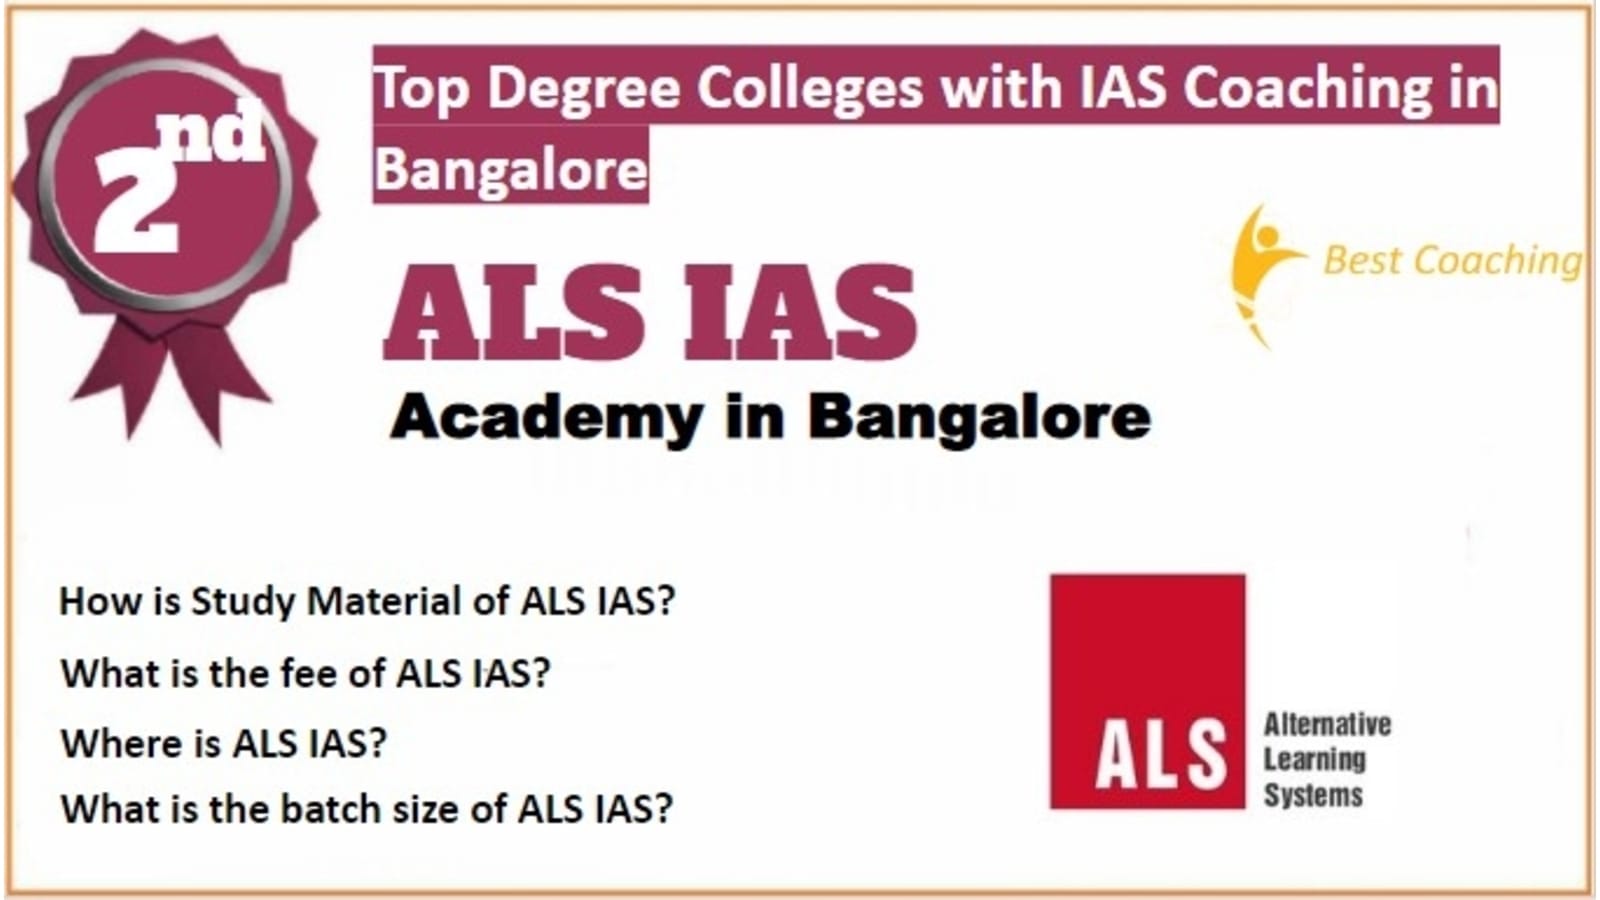 Rank 2 Best Degree Colleges with IAS Coaching in Bangalore